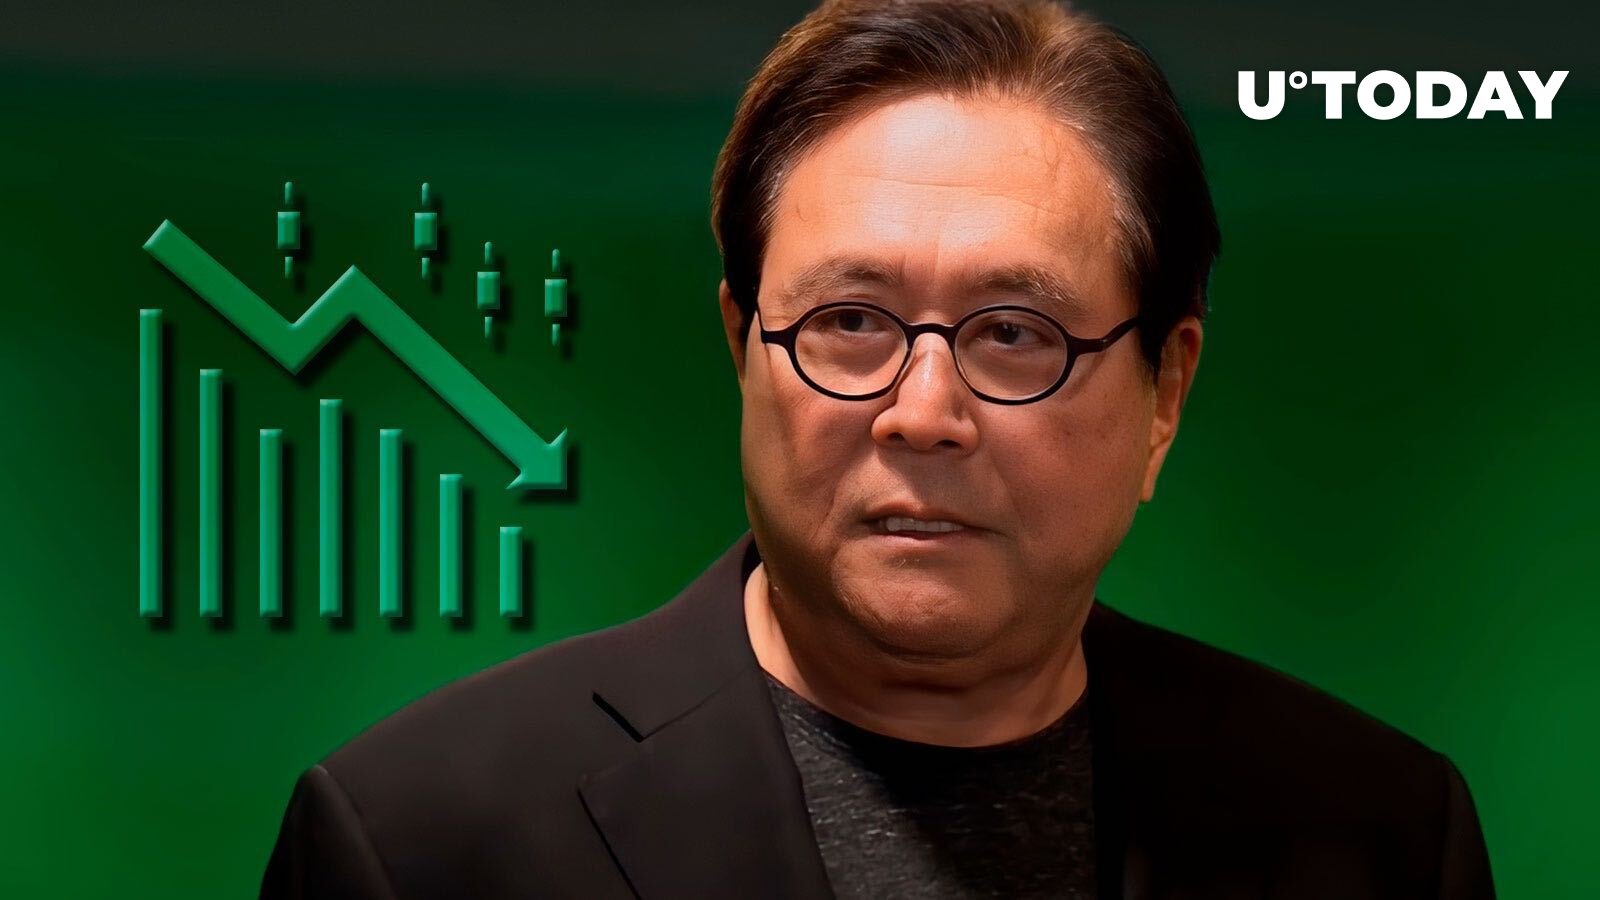 “Rich Dad, Poor Dad” Author Kiyosaki Says Market Crash He Foretold in 2013 Is Here and It’s Time to Get Richer